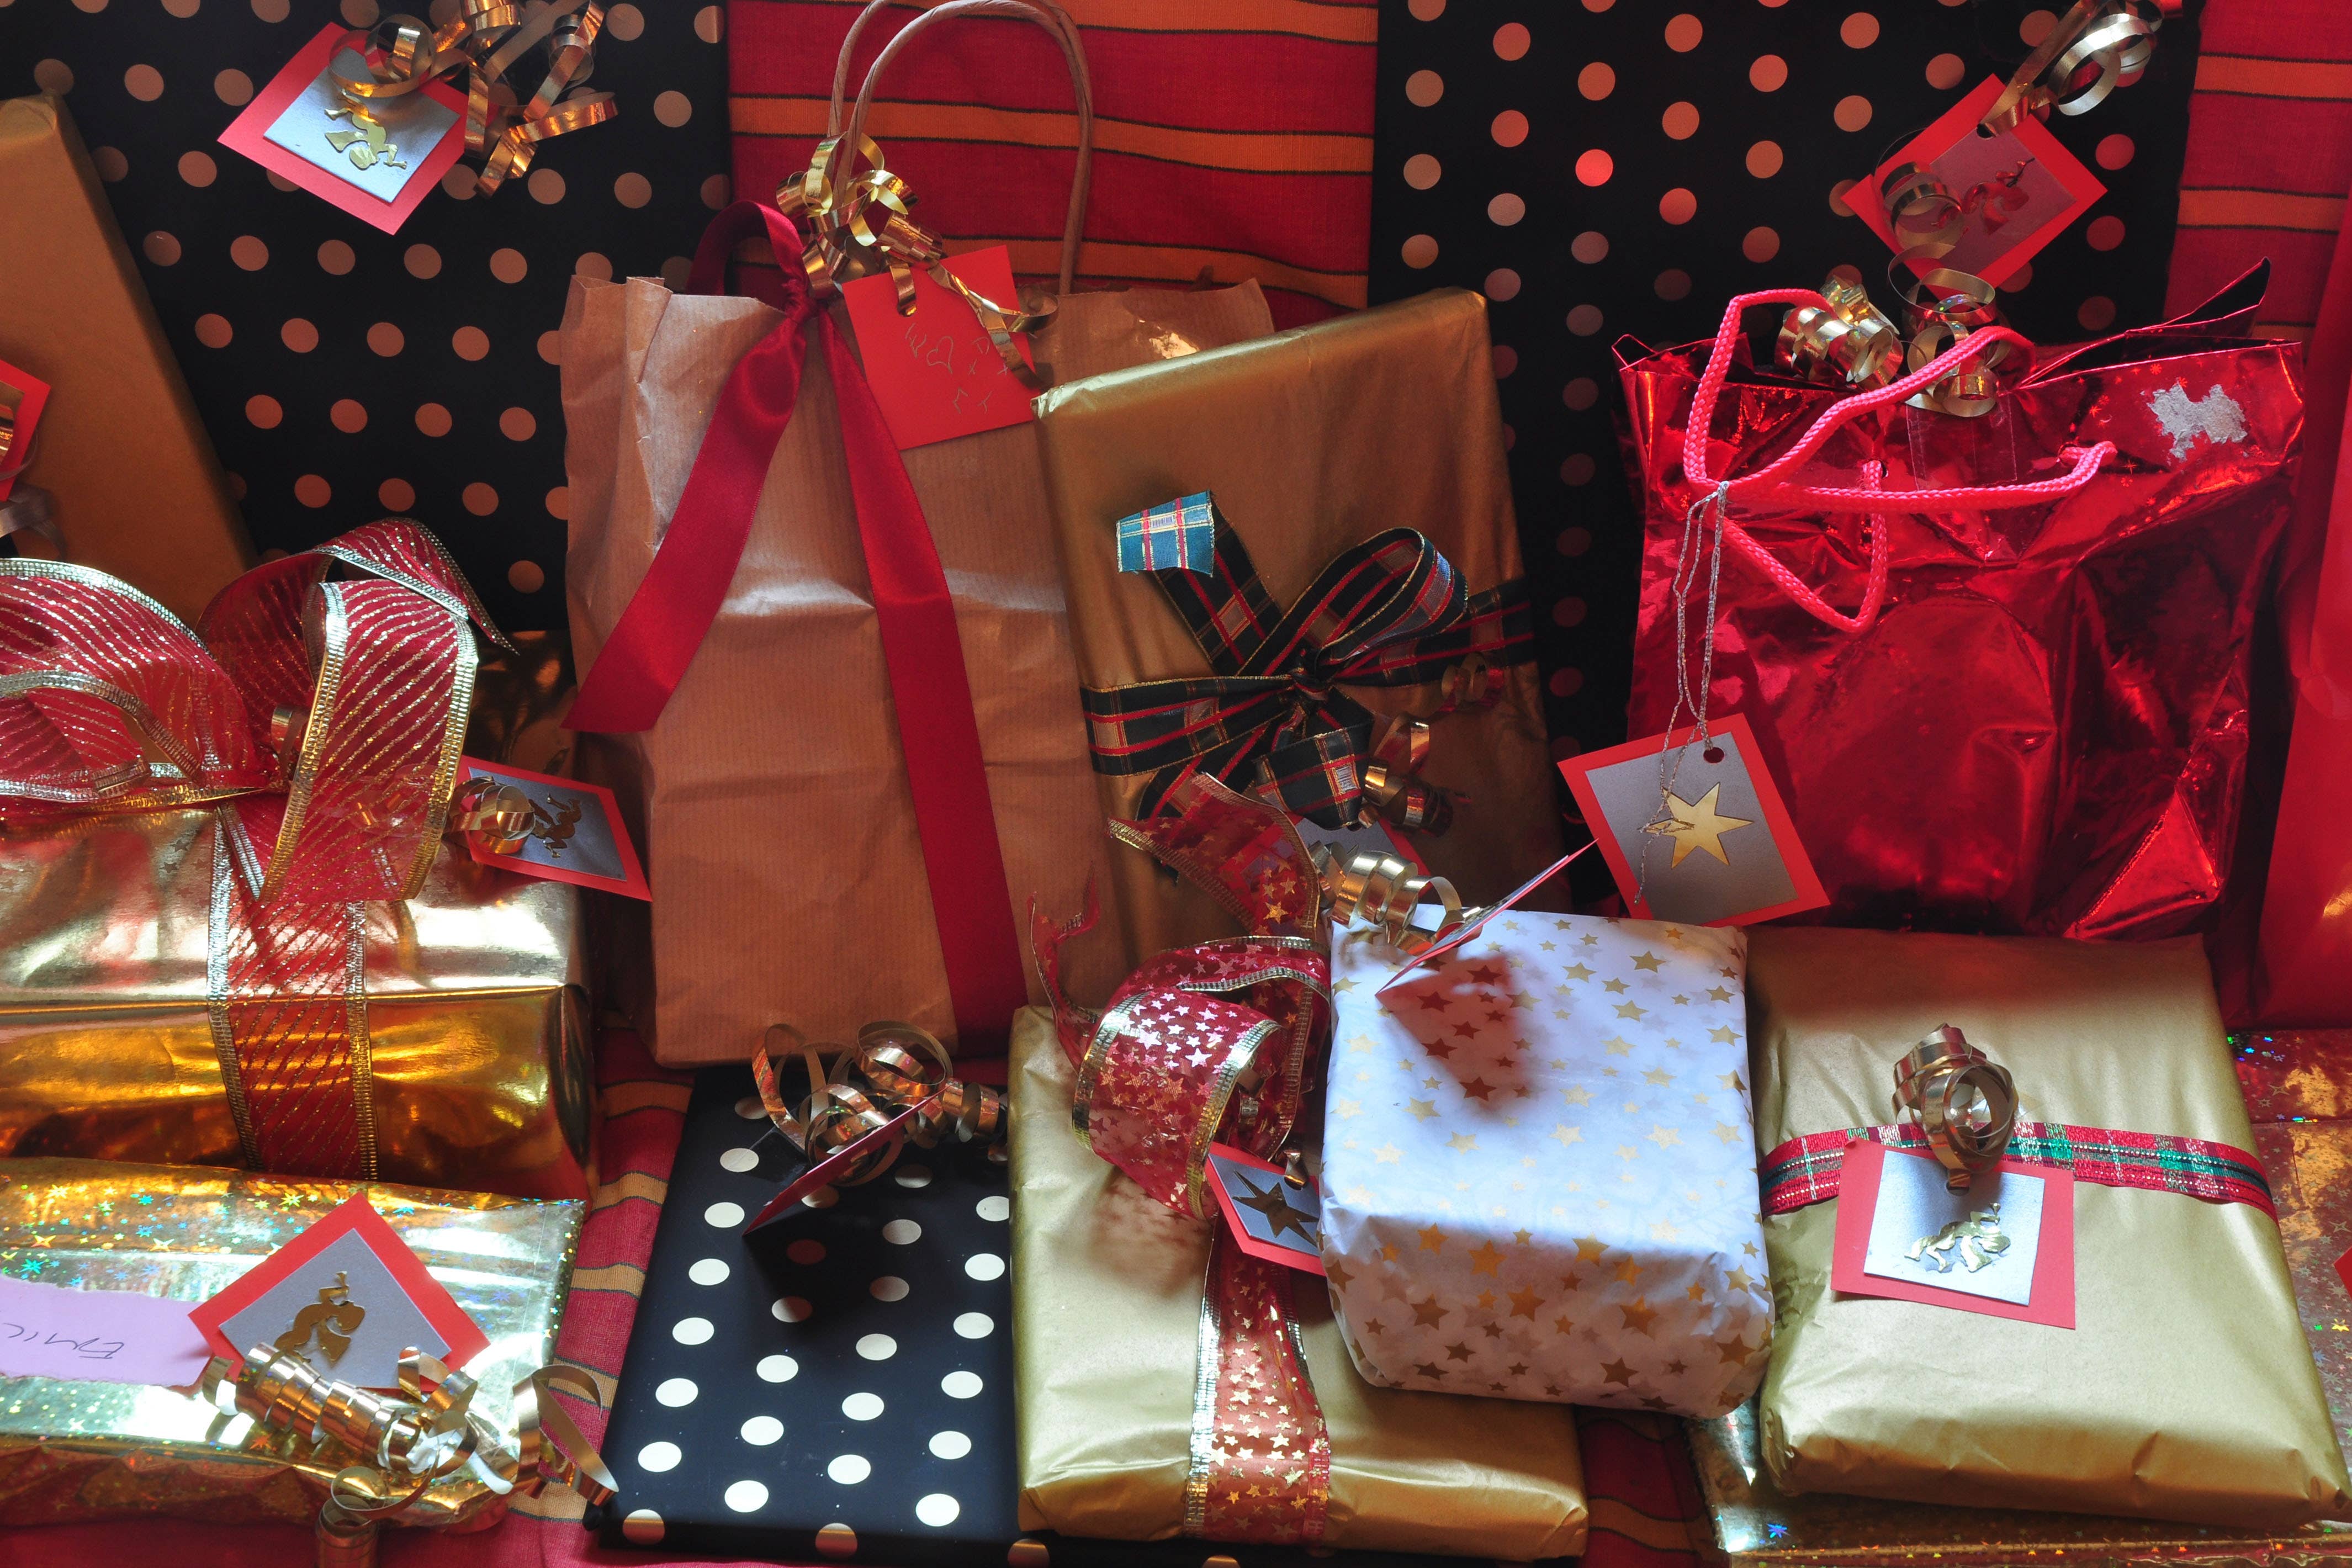 You probably can't recycle your Christmas wrapping paper